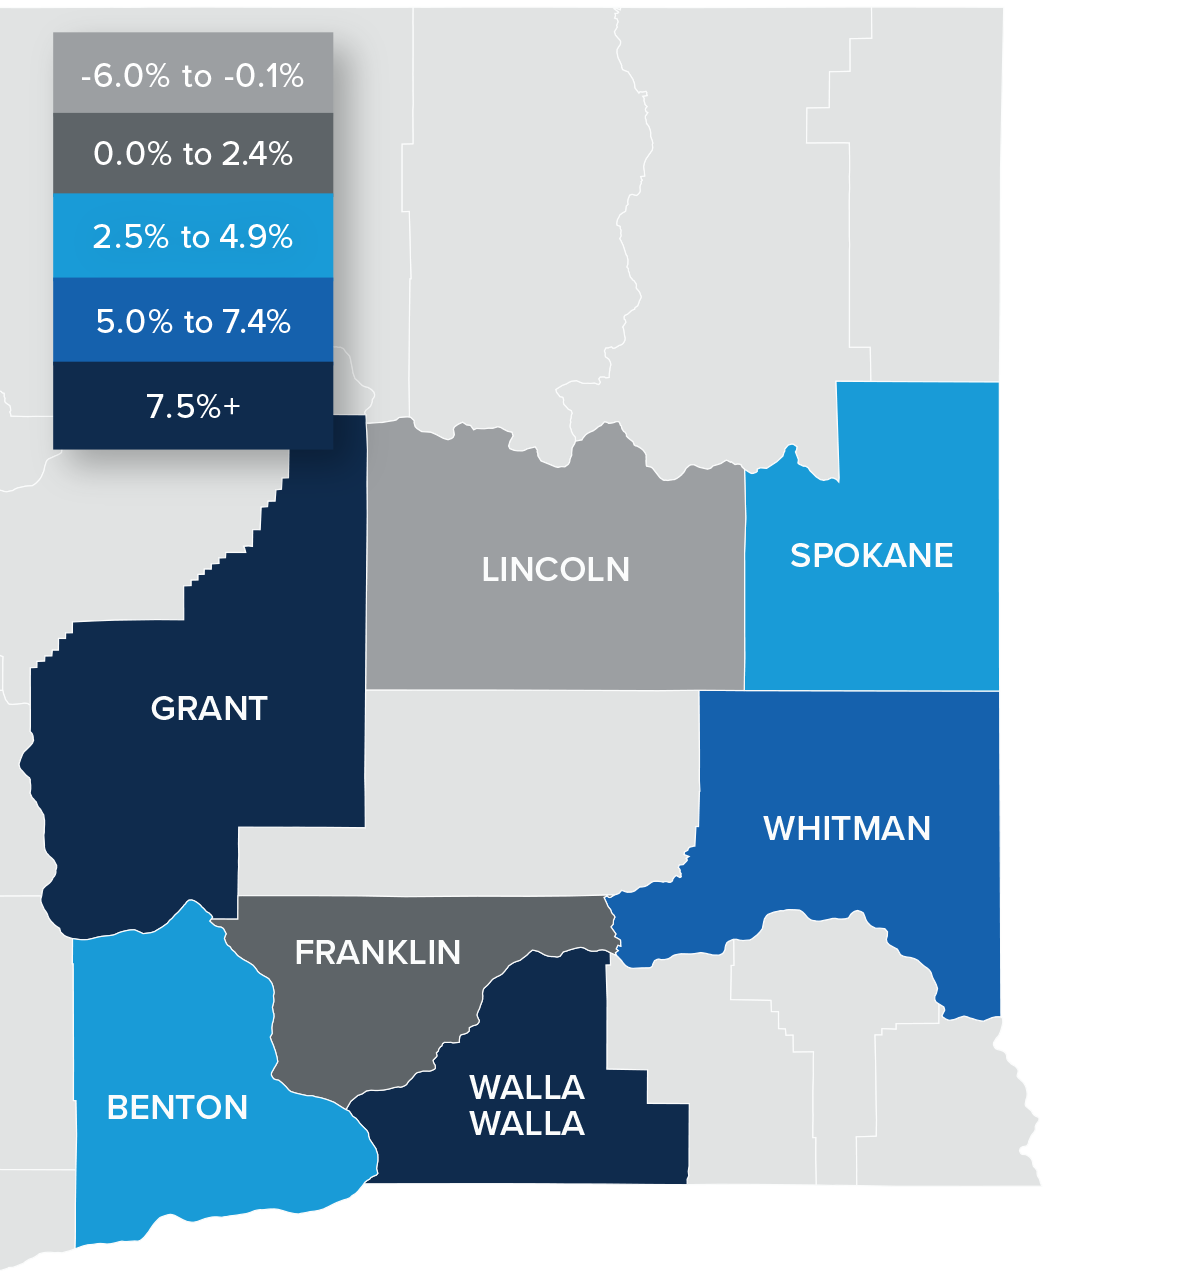 A map showing the real estate home prices percentage changes for various counties in Eastern Washington. Different colors correspond to different tiers of percentage change. Lincoln has a percentage change in the -6% to -0.1% range, Franklin is in the 0% to 2.4% change range, Spokane and Benton are in the 2.5% to 4.9%, Whitman is in the 5% to 7.4% range, and Grant and Walla Walla are in the 7.5%+ change range.